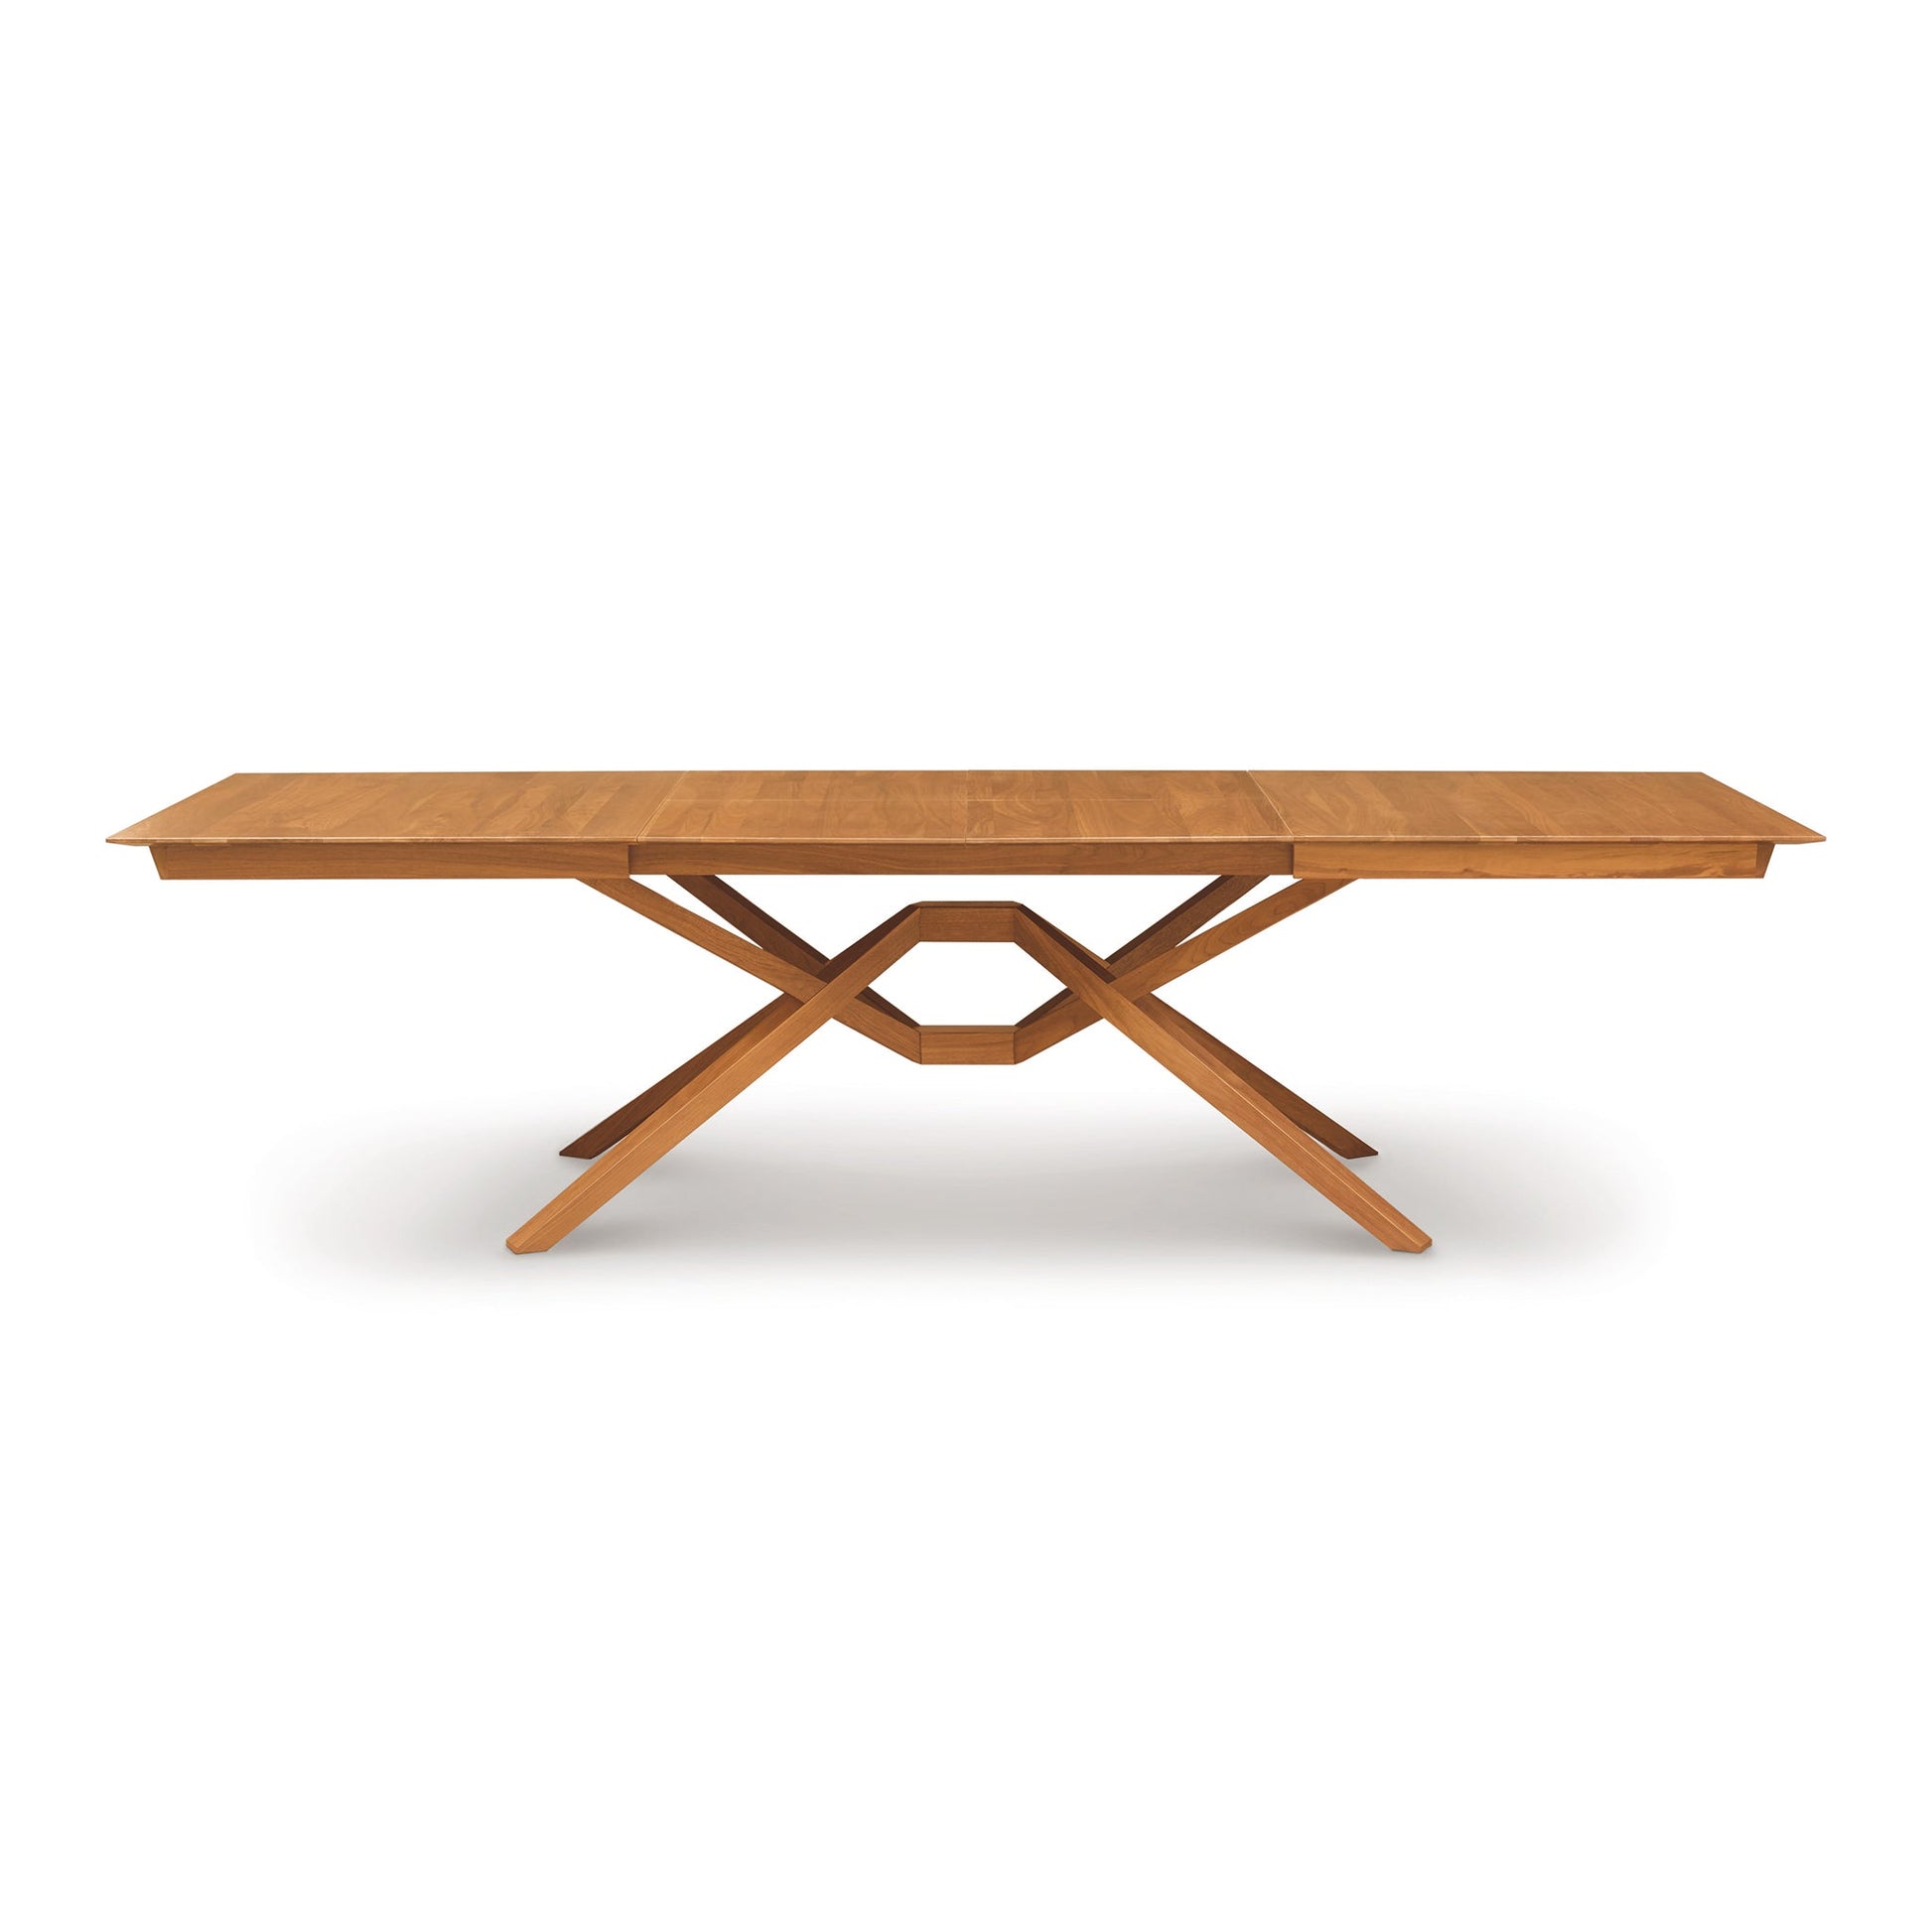 A wooden table with a cross leg on it.